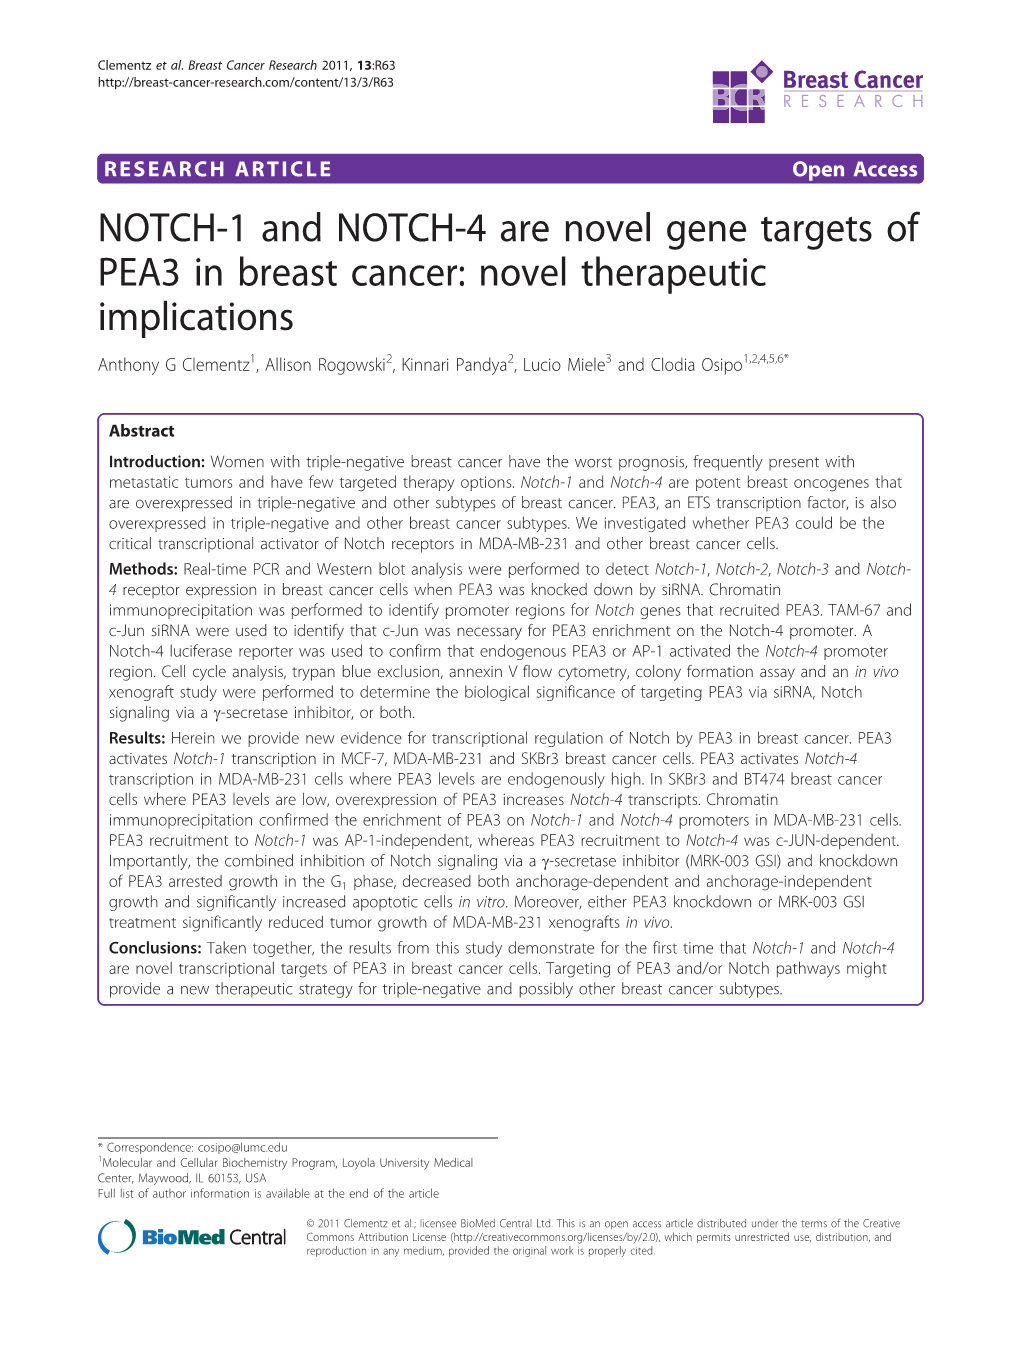 NOTCH-1 and NOTCH-4 Are Novel Gene Targets of PEA3 in Breast Cancer